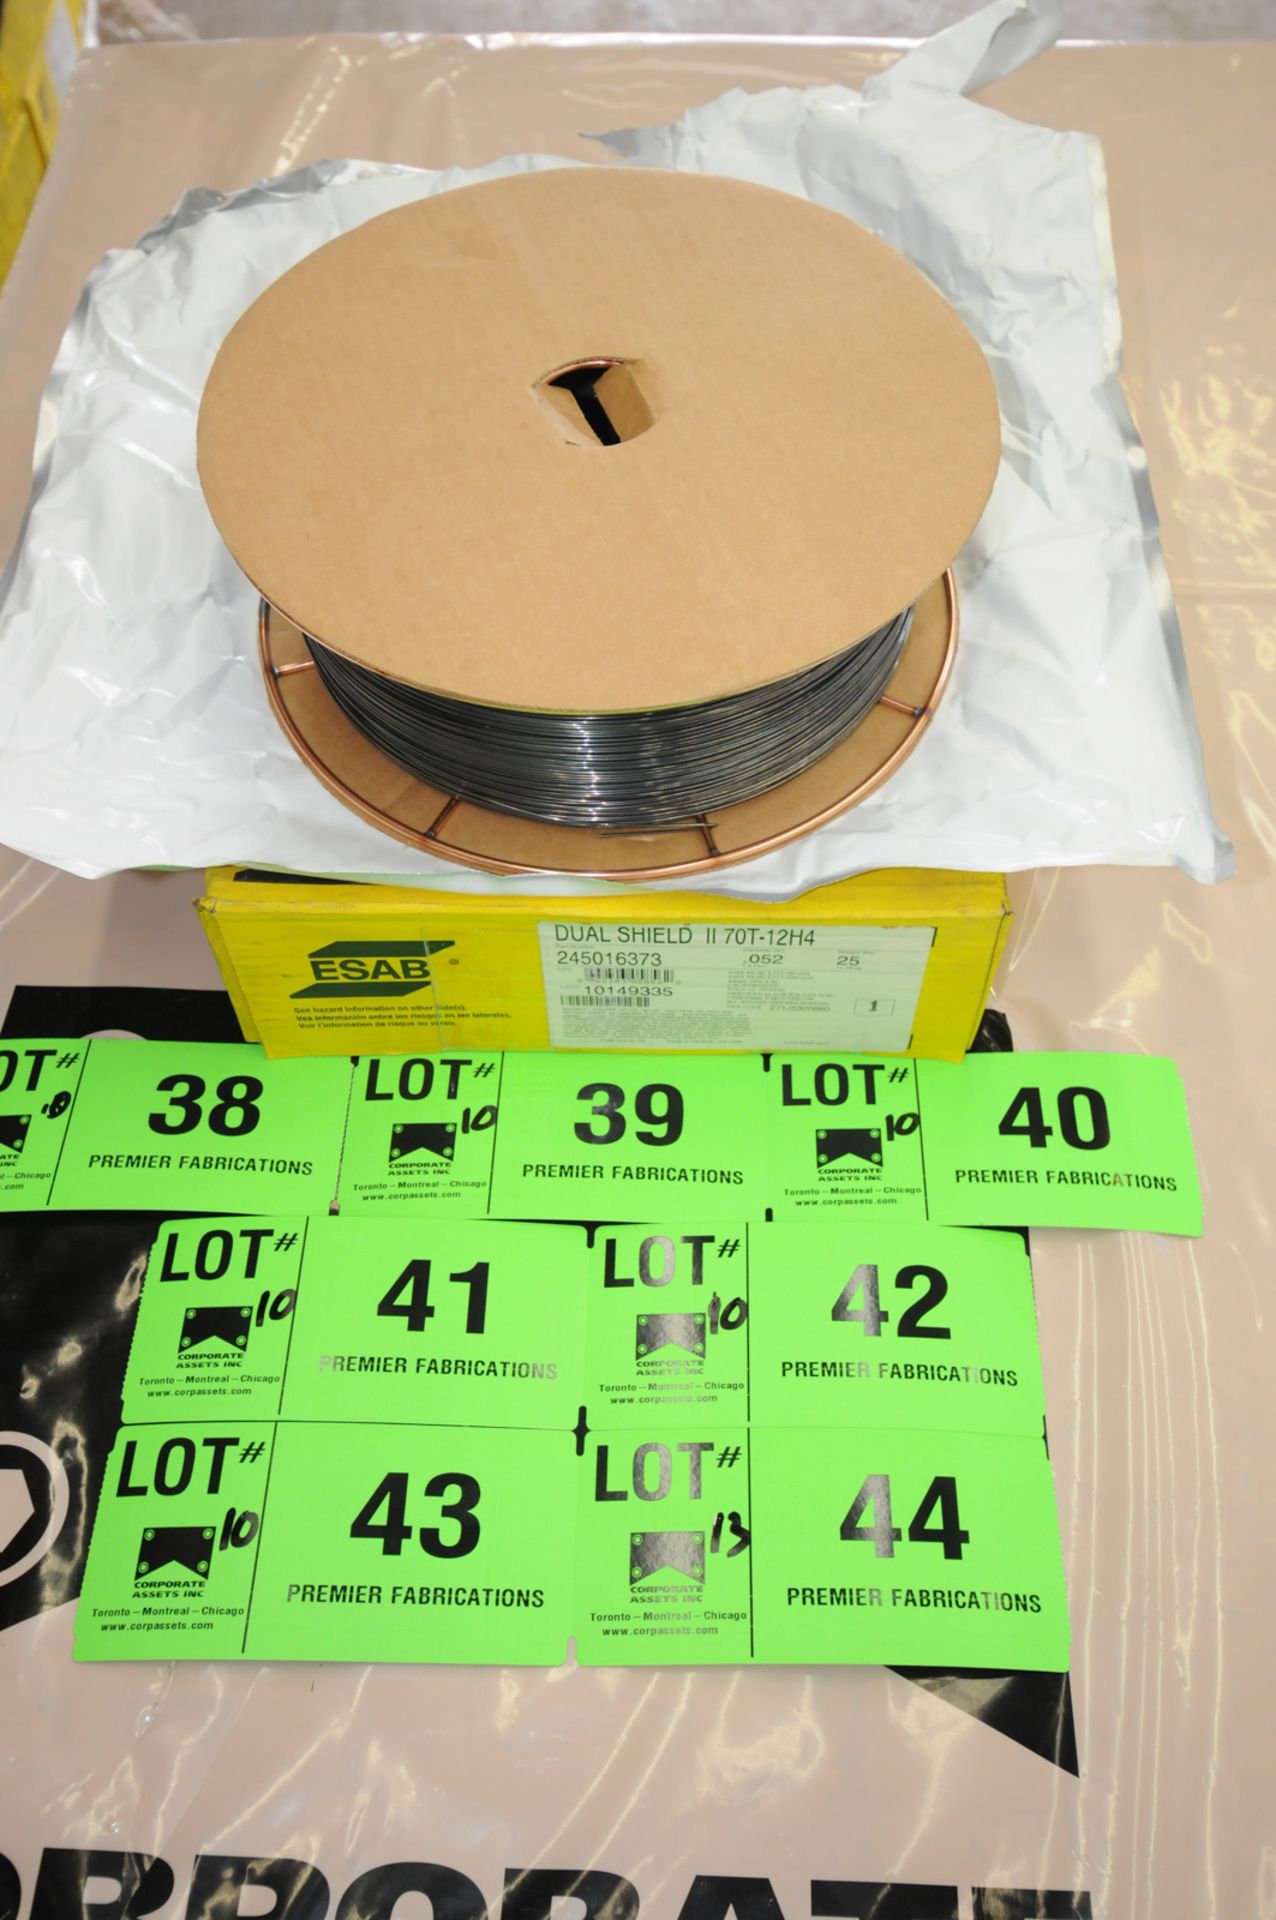 LOT/ (10) 25LB SPOOLS OF ESAB DUAL SHIELD II 70T-12H4 0.052" DIAMETER WELDING WIRE CONFORMING TO AWS